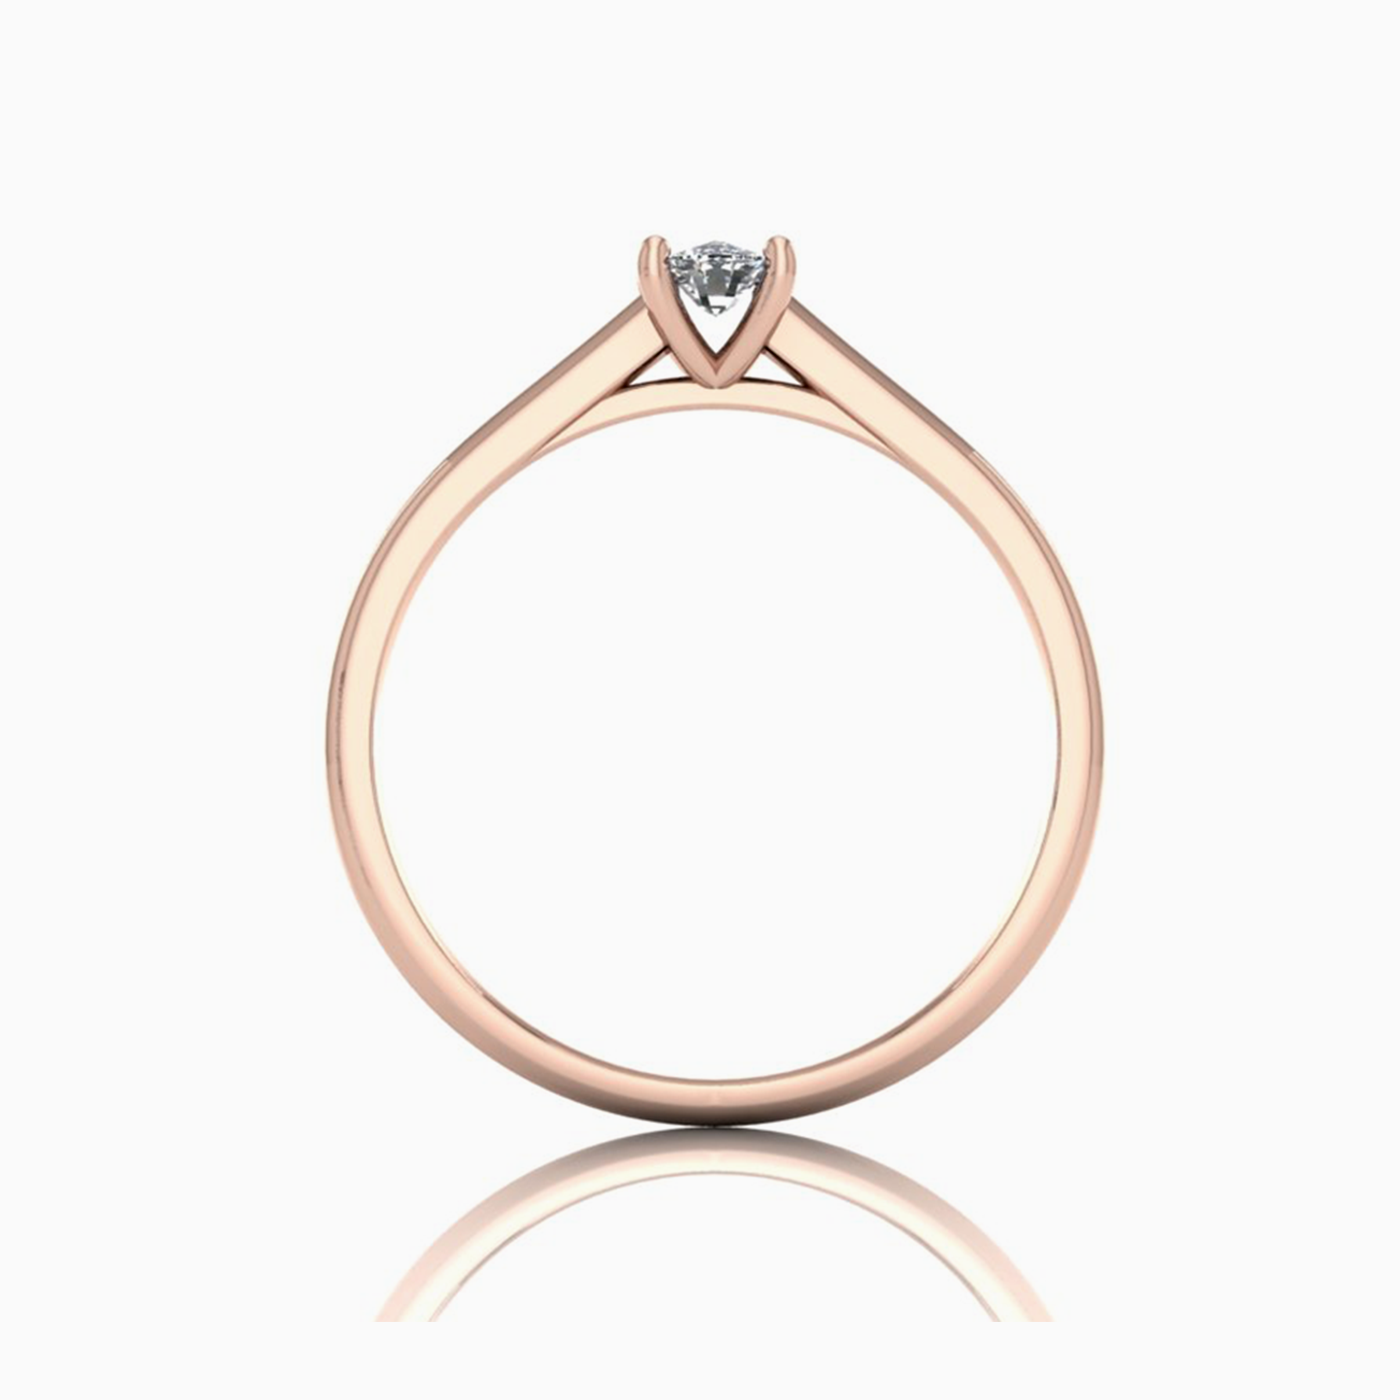 18k rose gold  0,30 ct 4 prongs solitaire elongated cushion cut diamond engagement ring with whisper thin band Photos & images